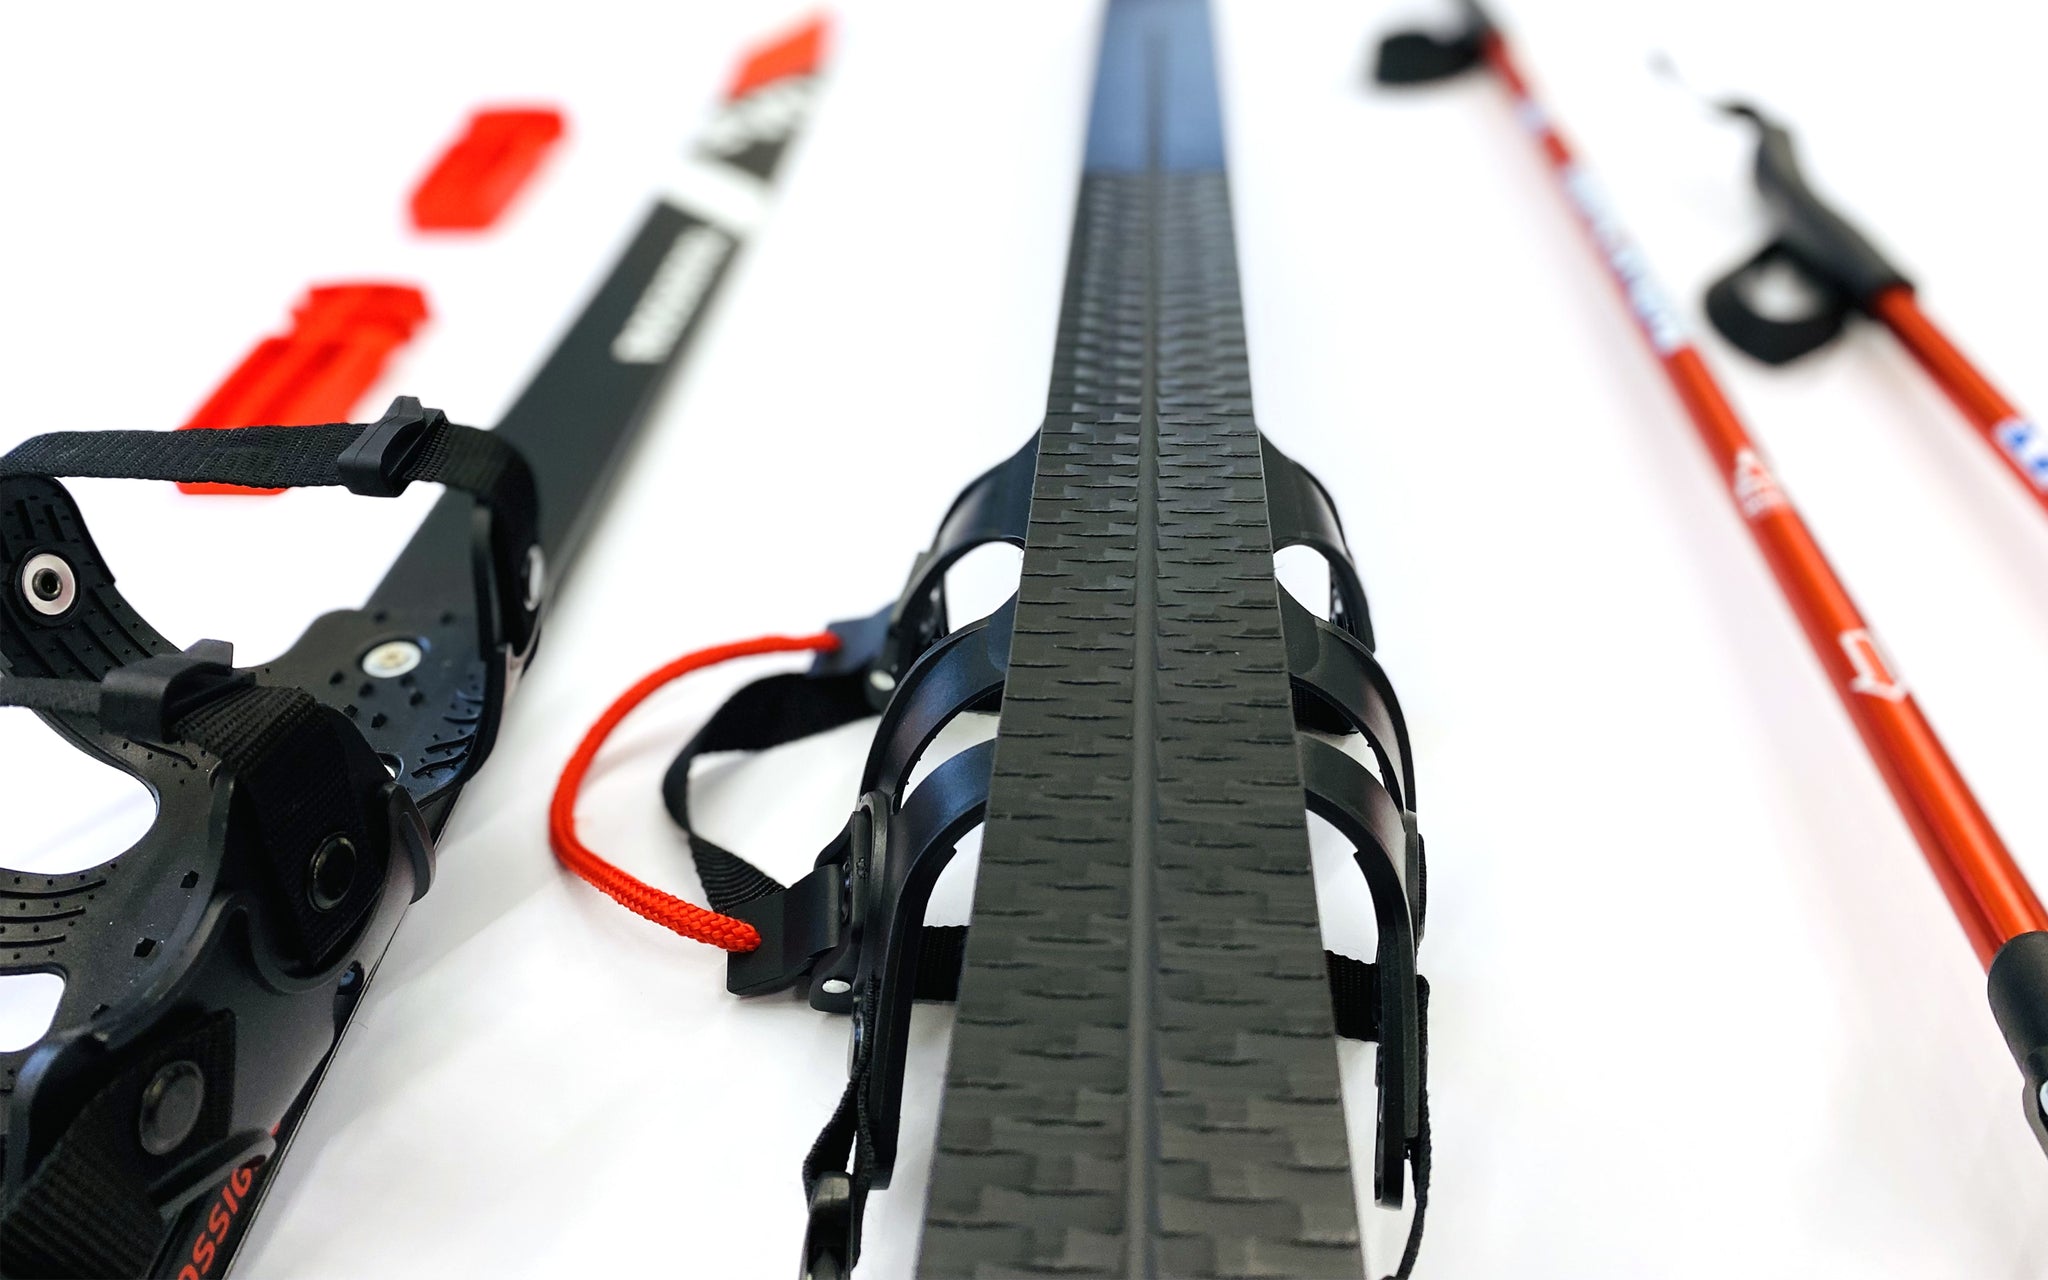 Nordic Rocks Cross-Country Ski Touring Ski Set - NO Ski Boots Required - Step-In Bindings - Poles